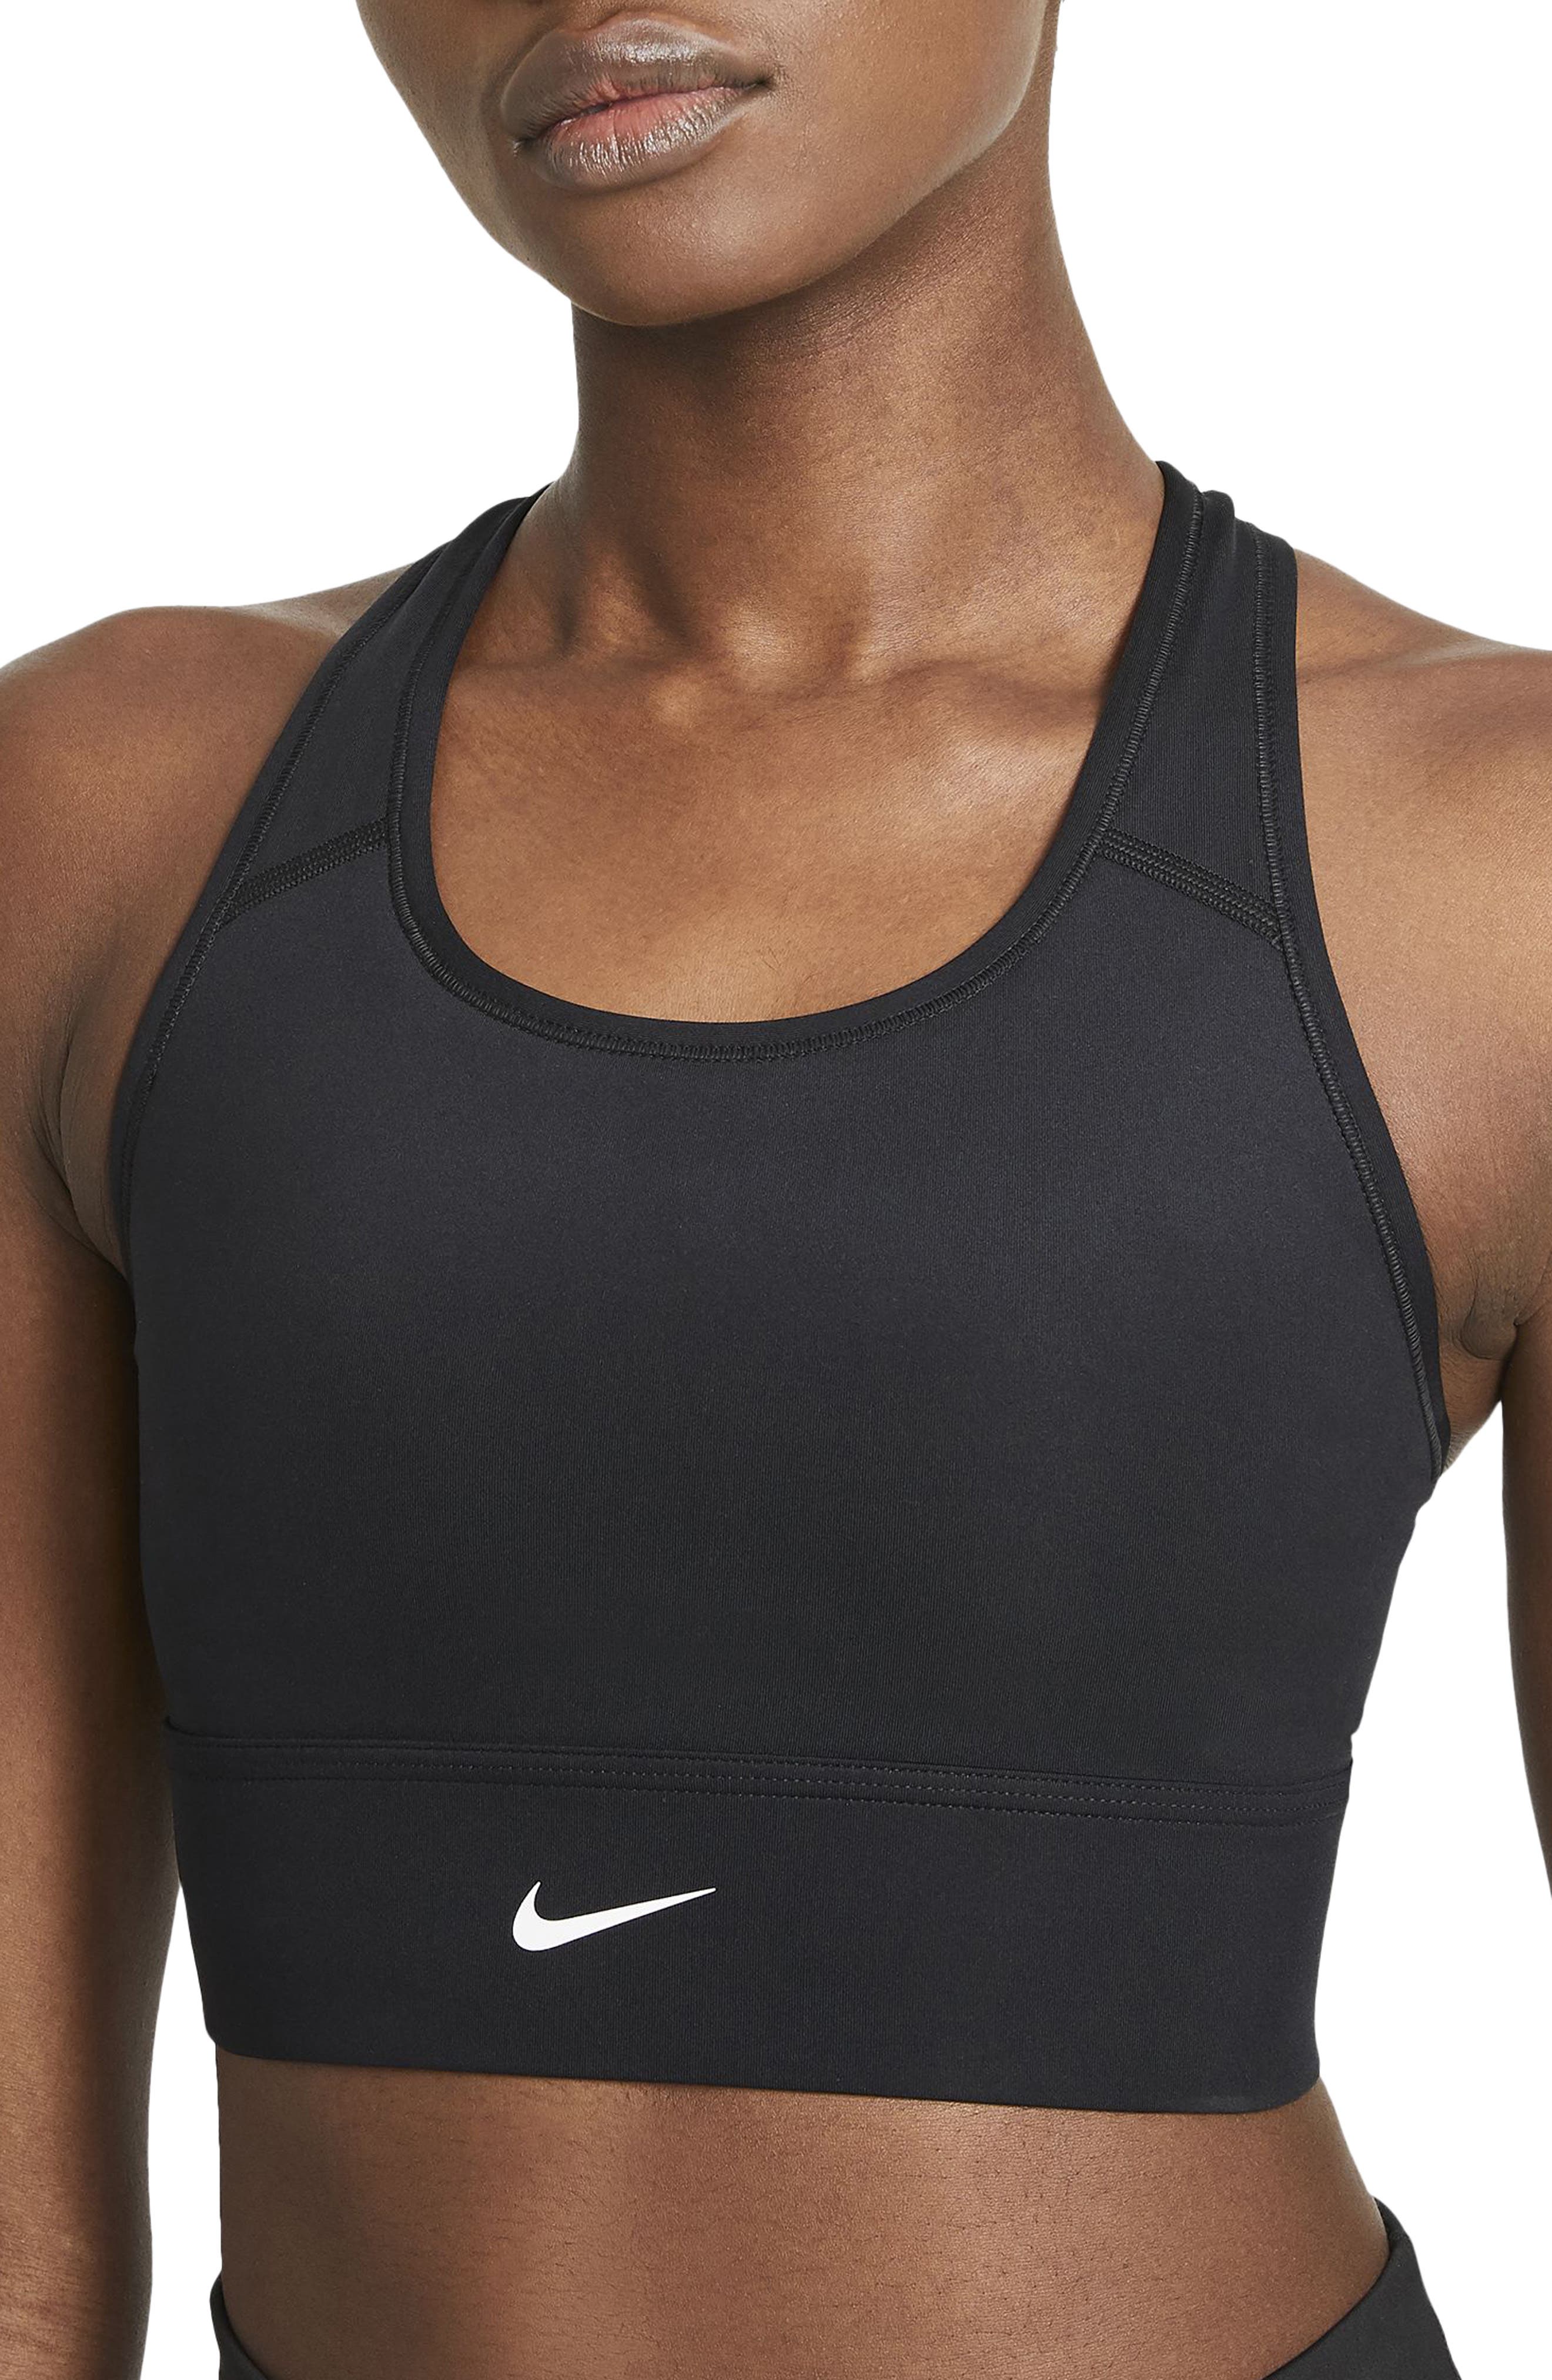 Sports Bras for Young Girls